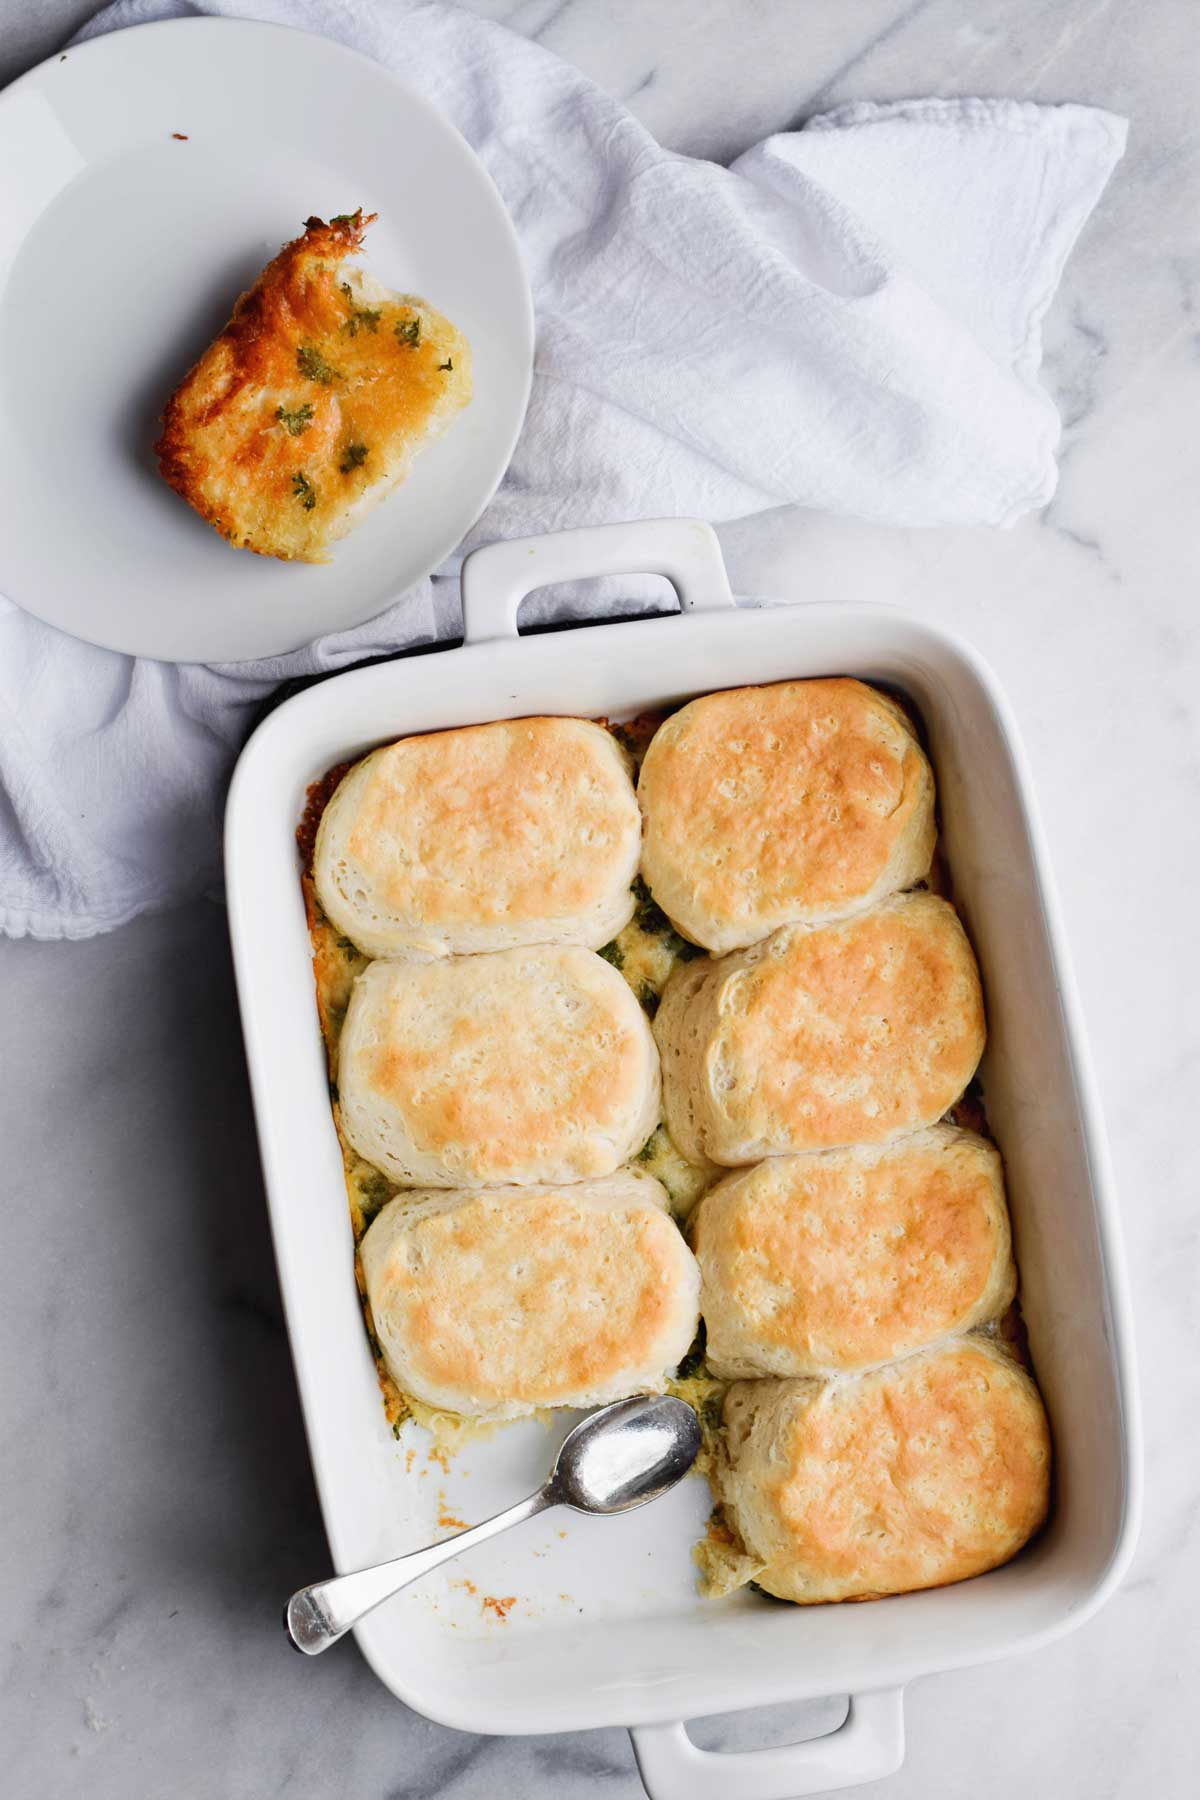 Parmesan Parsley Biscuits With Refrigerated Biscuit Dough